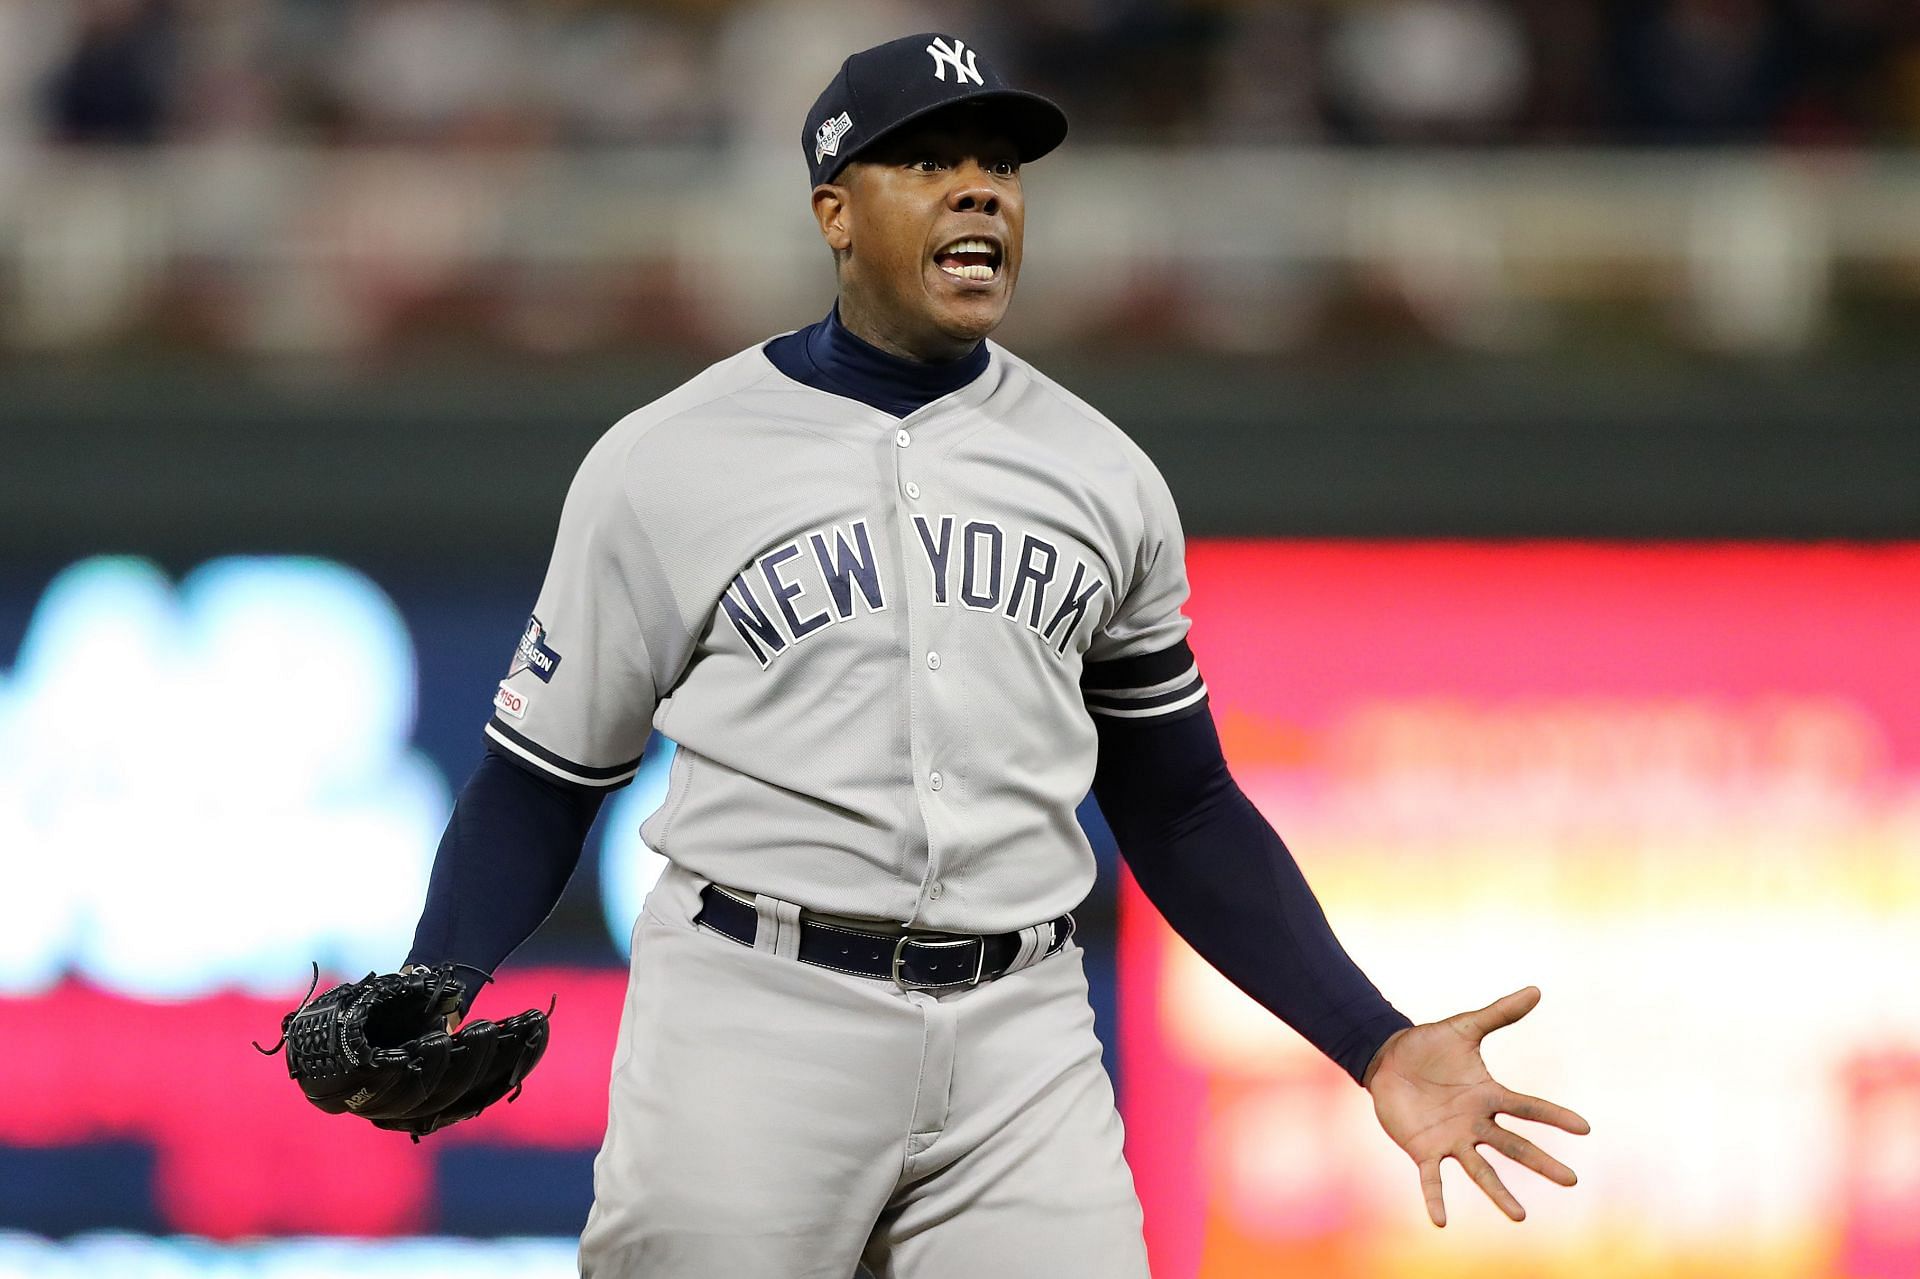 Aroldis Chapman (54) of the New York Yankees celebrates after the final out defeating the Minnesota Twins 5-1 in game three of the American League Division Series to advance to the American League Championship Series at Target Field on October 07, 2019, in Minneapolis, Minnesota. (Photo by Elsa/Getty Images)